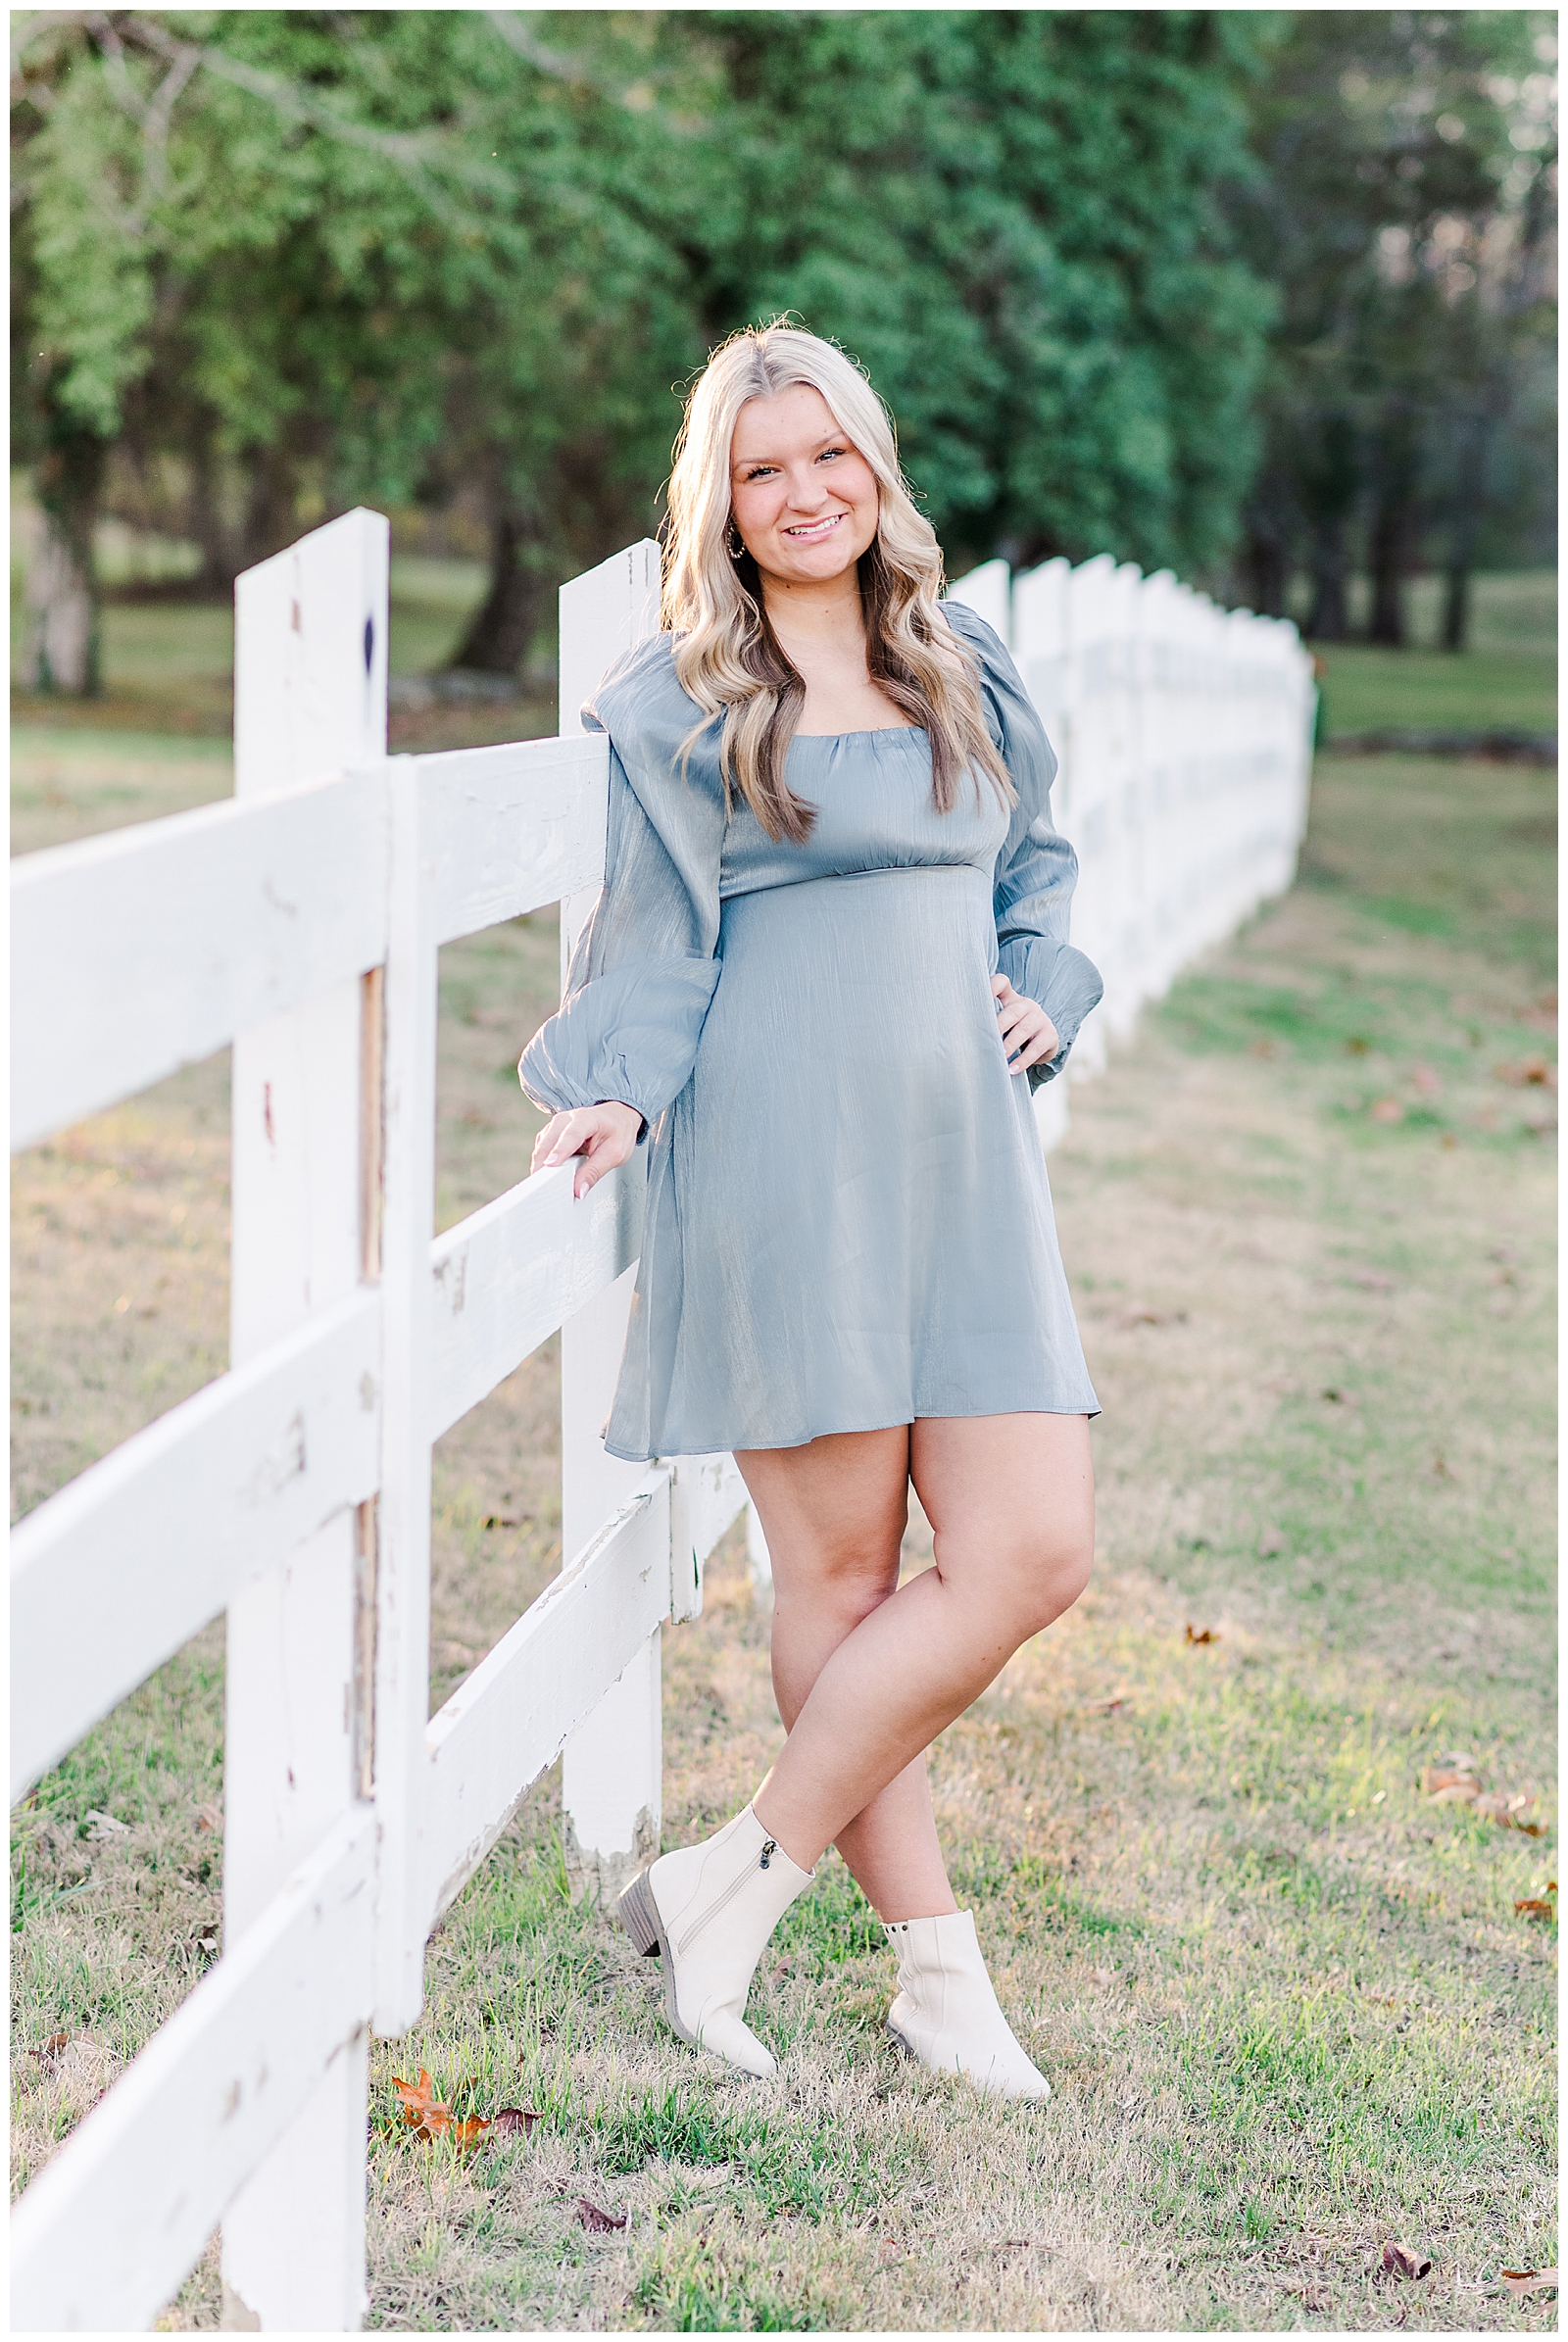 High school senior girl, leaning against a white fence in Mt. Juliet, TN